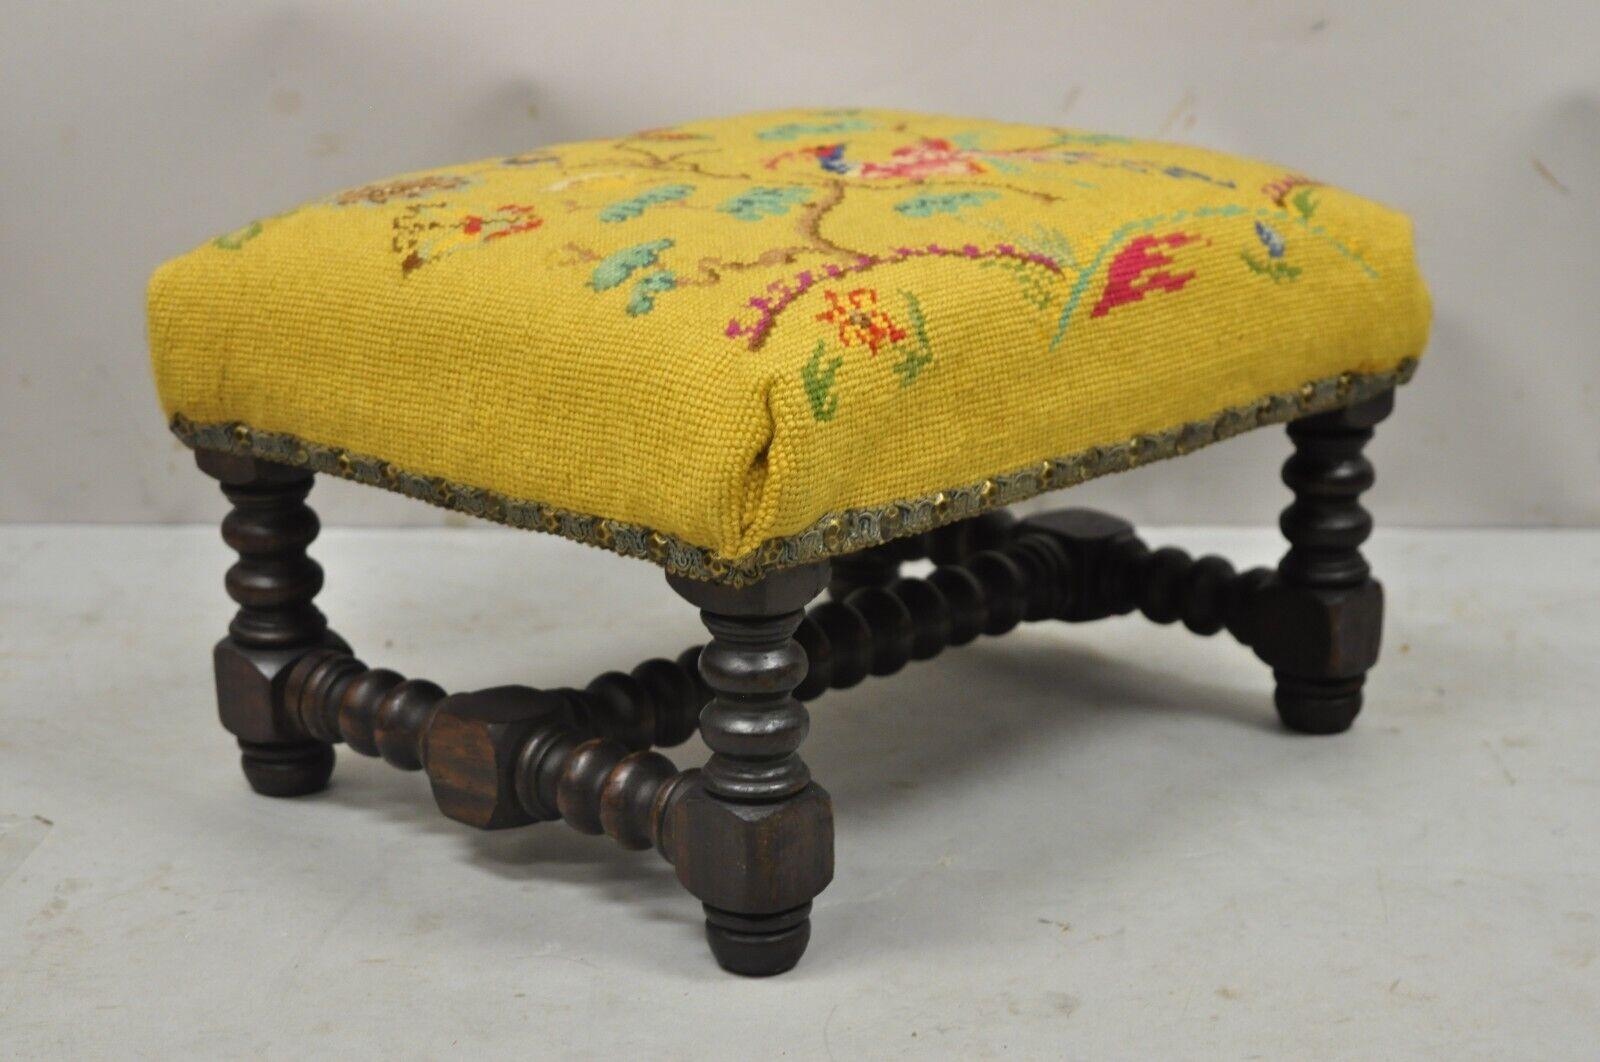 Antique Jenny Lind Turn Carved Walnut Needlepoint Small Footstool. Item features floral needlepoint seat with bird, turn carved walnut base, very nice antique item, label to underside reads 